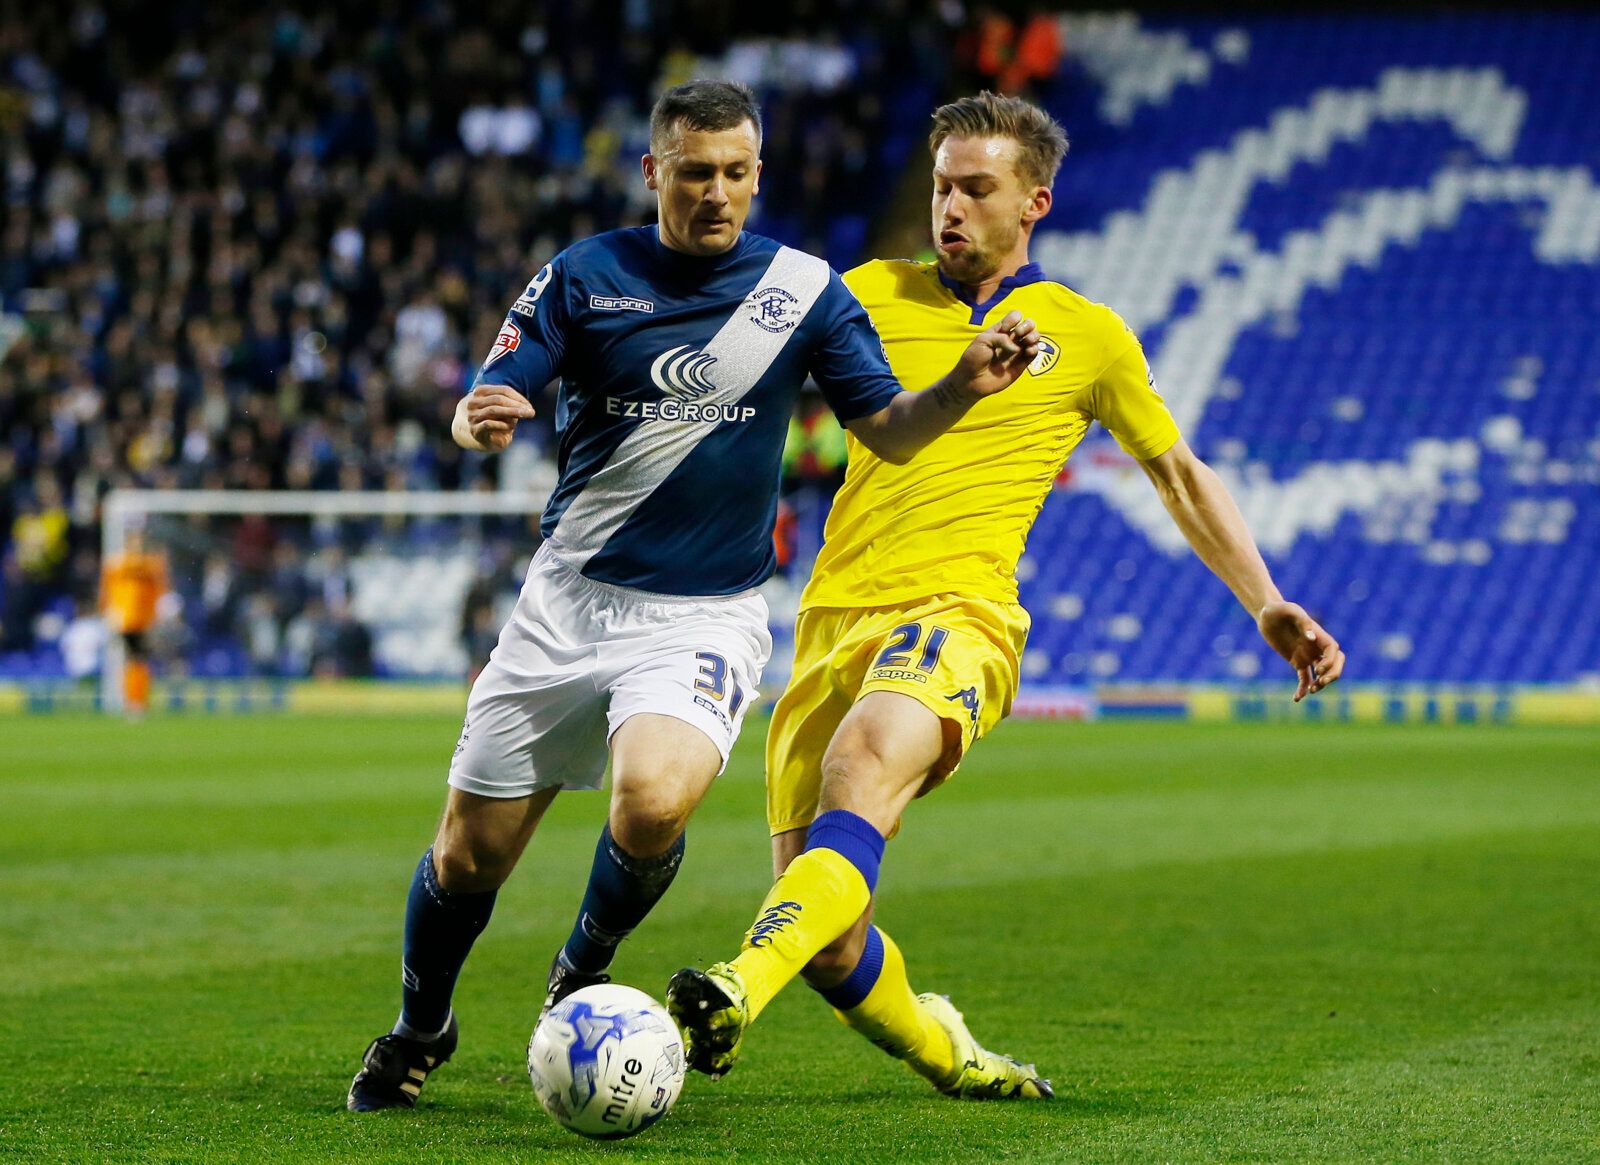 Football Soccer - Birmingham City v Leeds United - Sky Bet Football League Championship - St Andrews - 12/4/16
Leeds' Charlie Taylor and Birmingham's Paul Caddis in action
Mandatory Credit: Action Images / Paul Childs
Livepic
EDITORIAL USE ONLY. No use with unauthorized audio, video, data, fixture lists, club/league logos or 